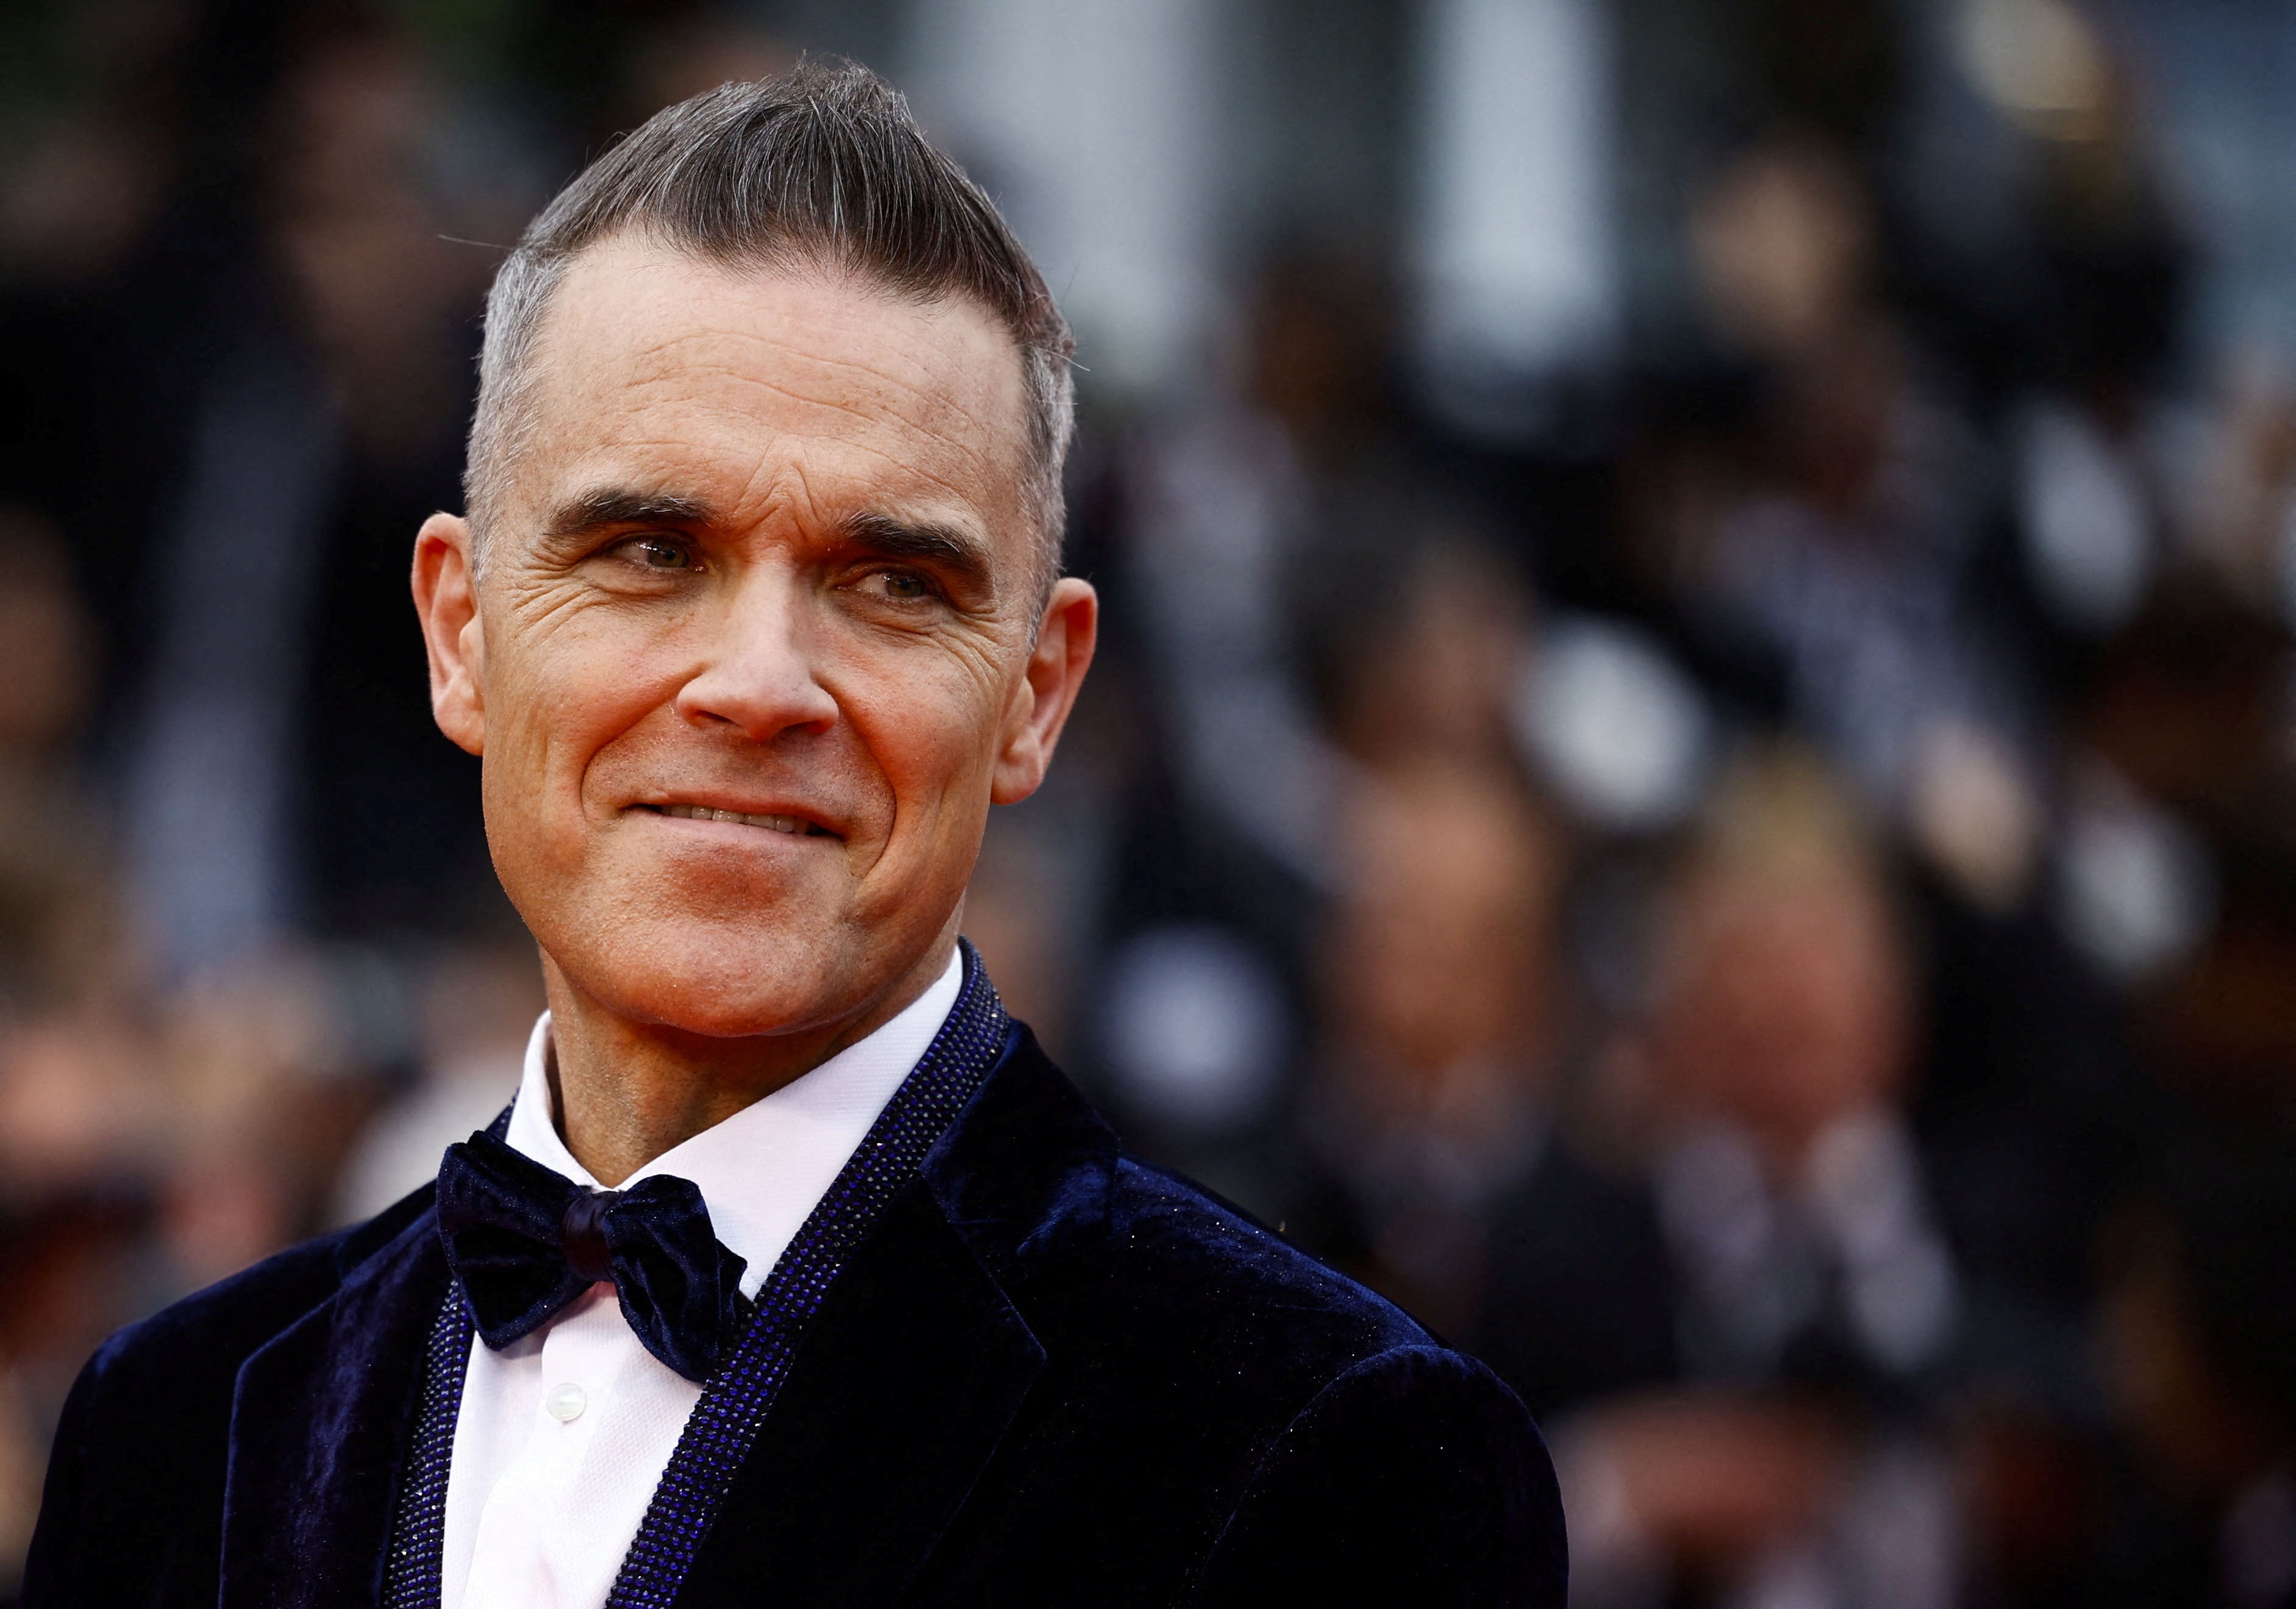 robbie williams recalls the shoplifting joke that almost got him ‘cancelled’